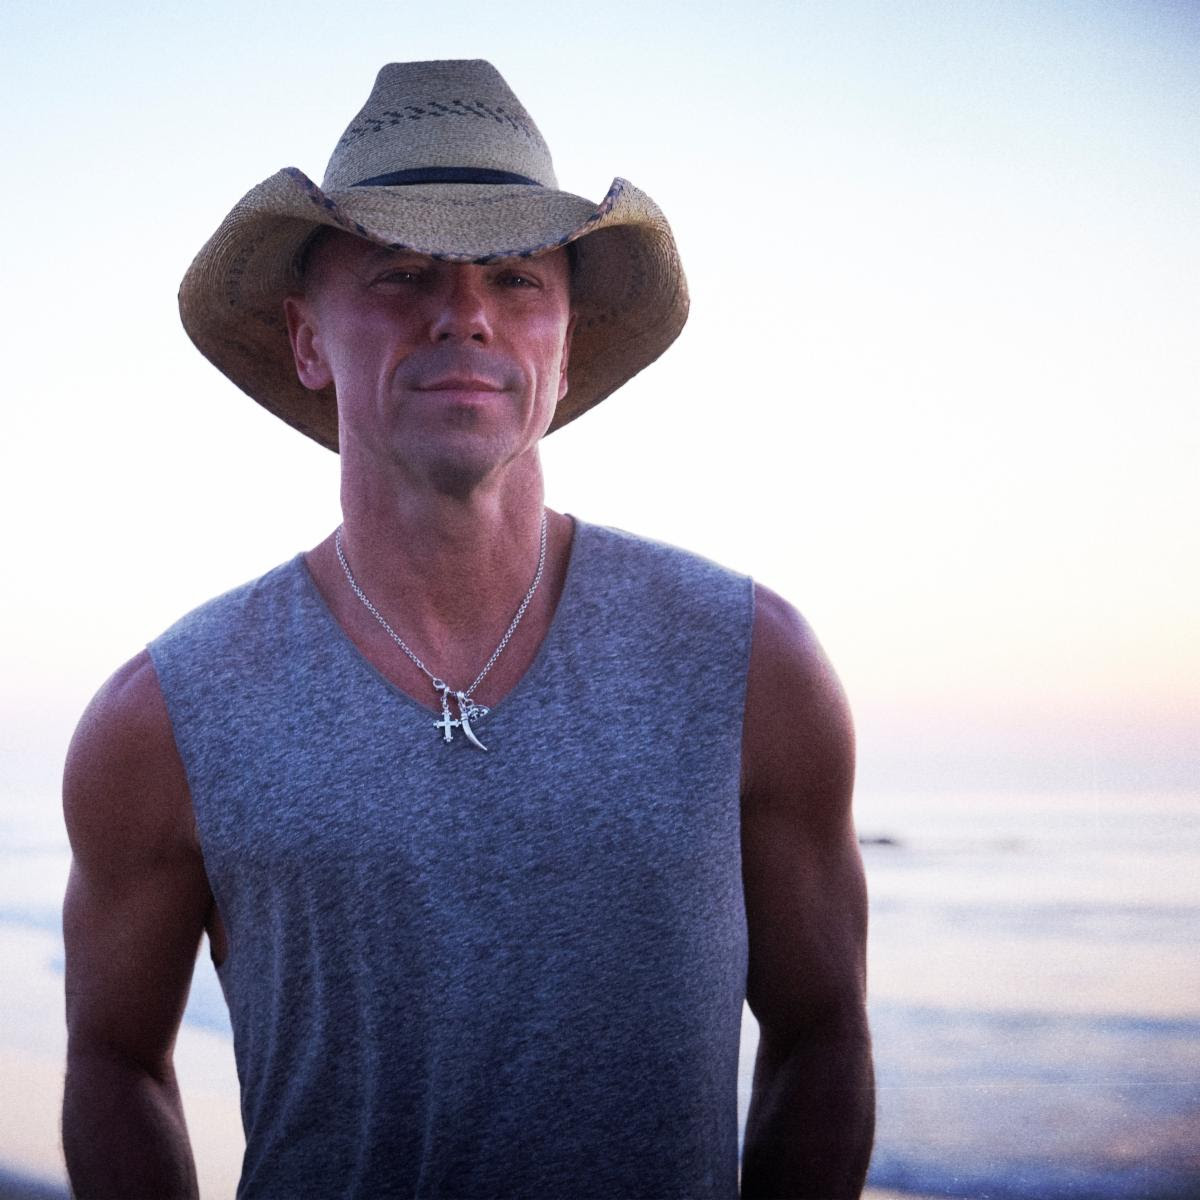 New Music Friday: Kenny Chesney, Maddie & Tae, Lee Brice & More Drop New Songs